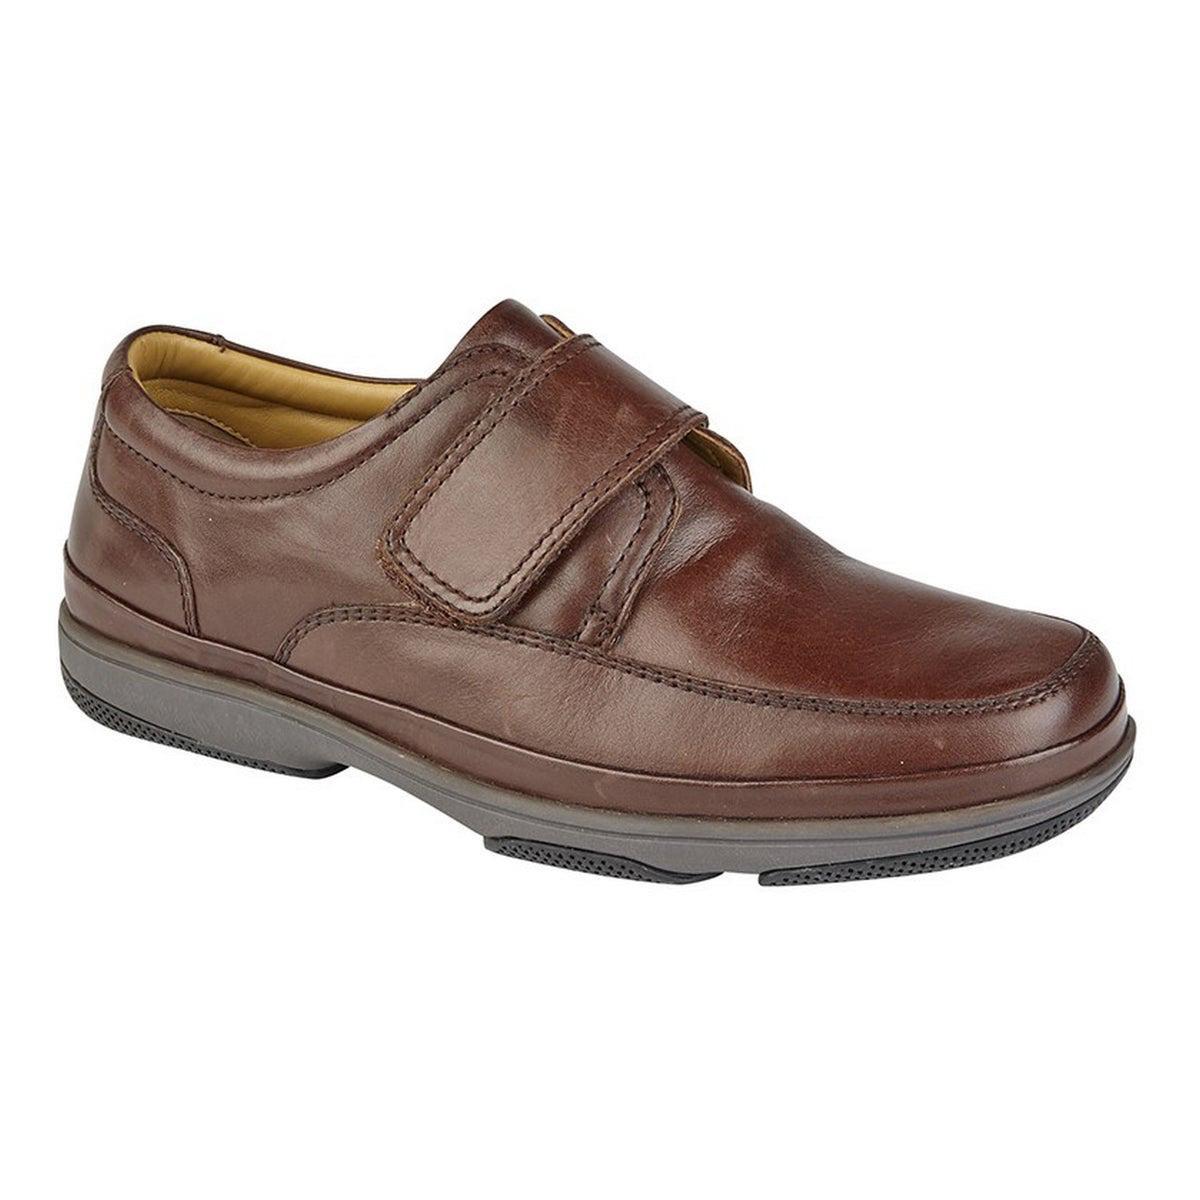 Roamers Mens Leather Wide Fit Touch Fastening Casual Shoes (Brown) (9 UK)